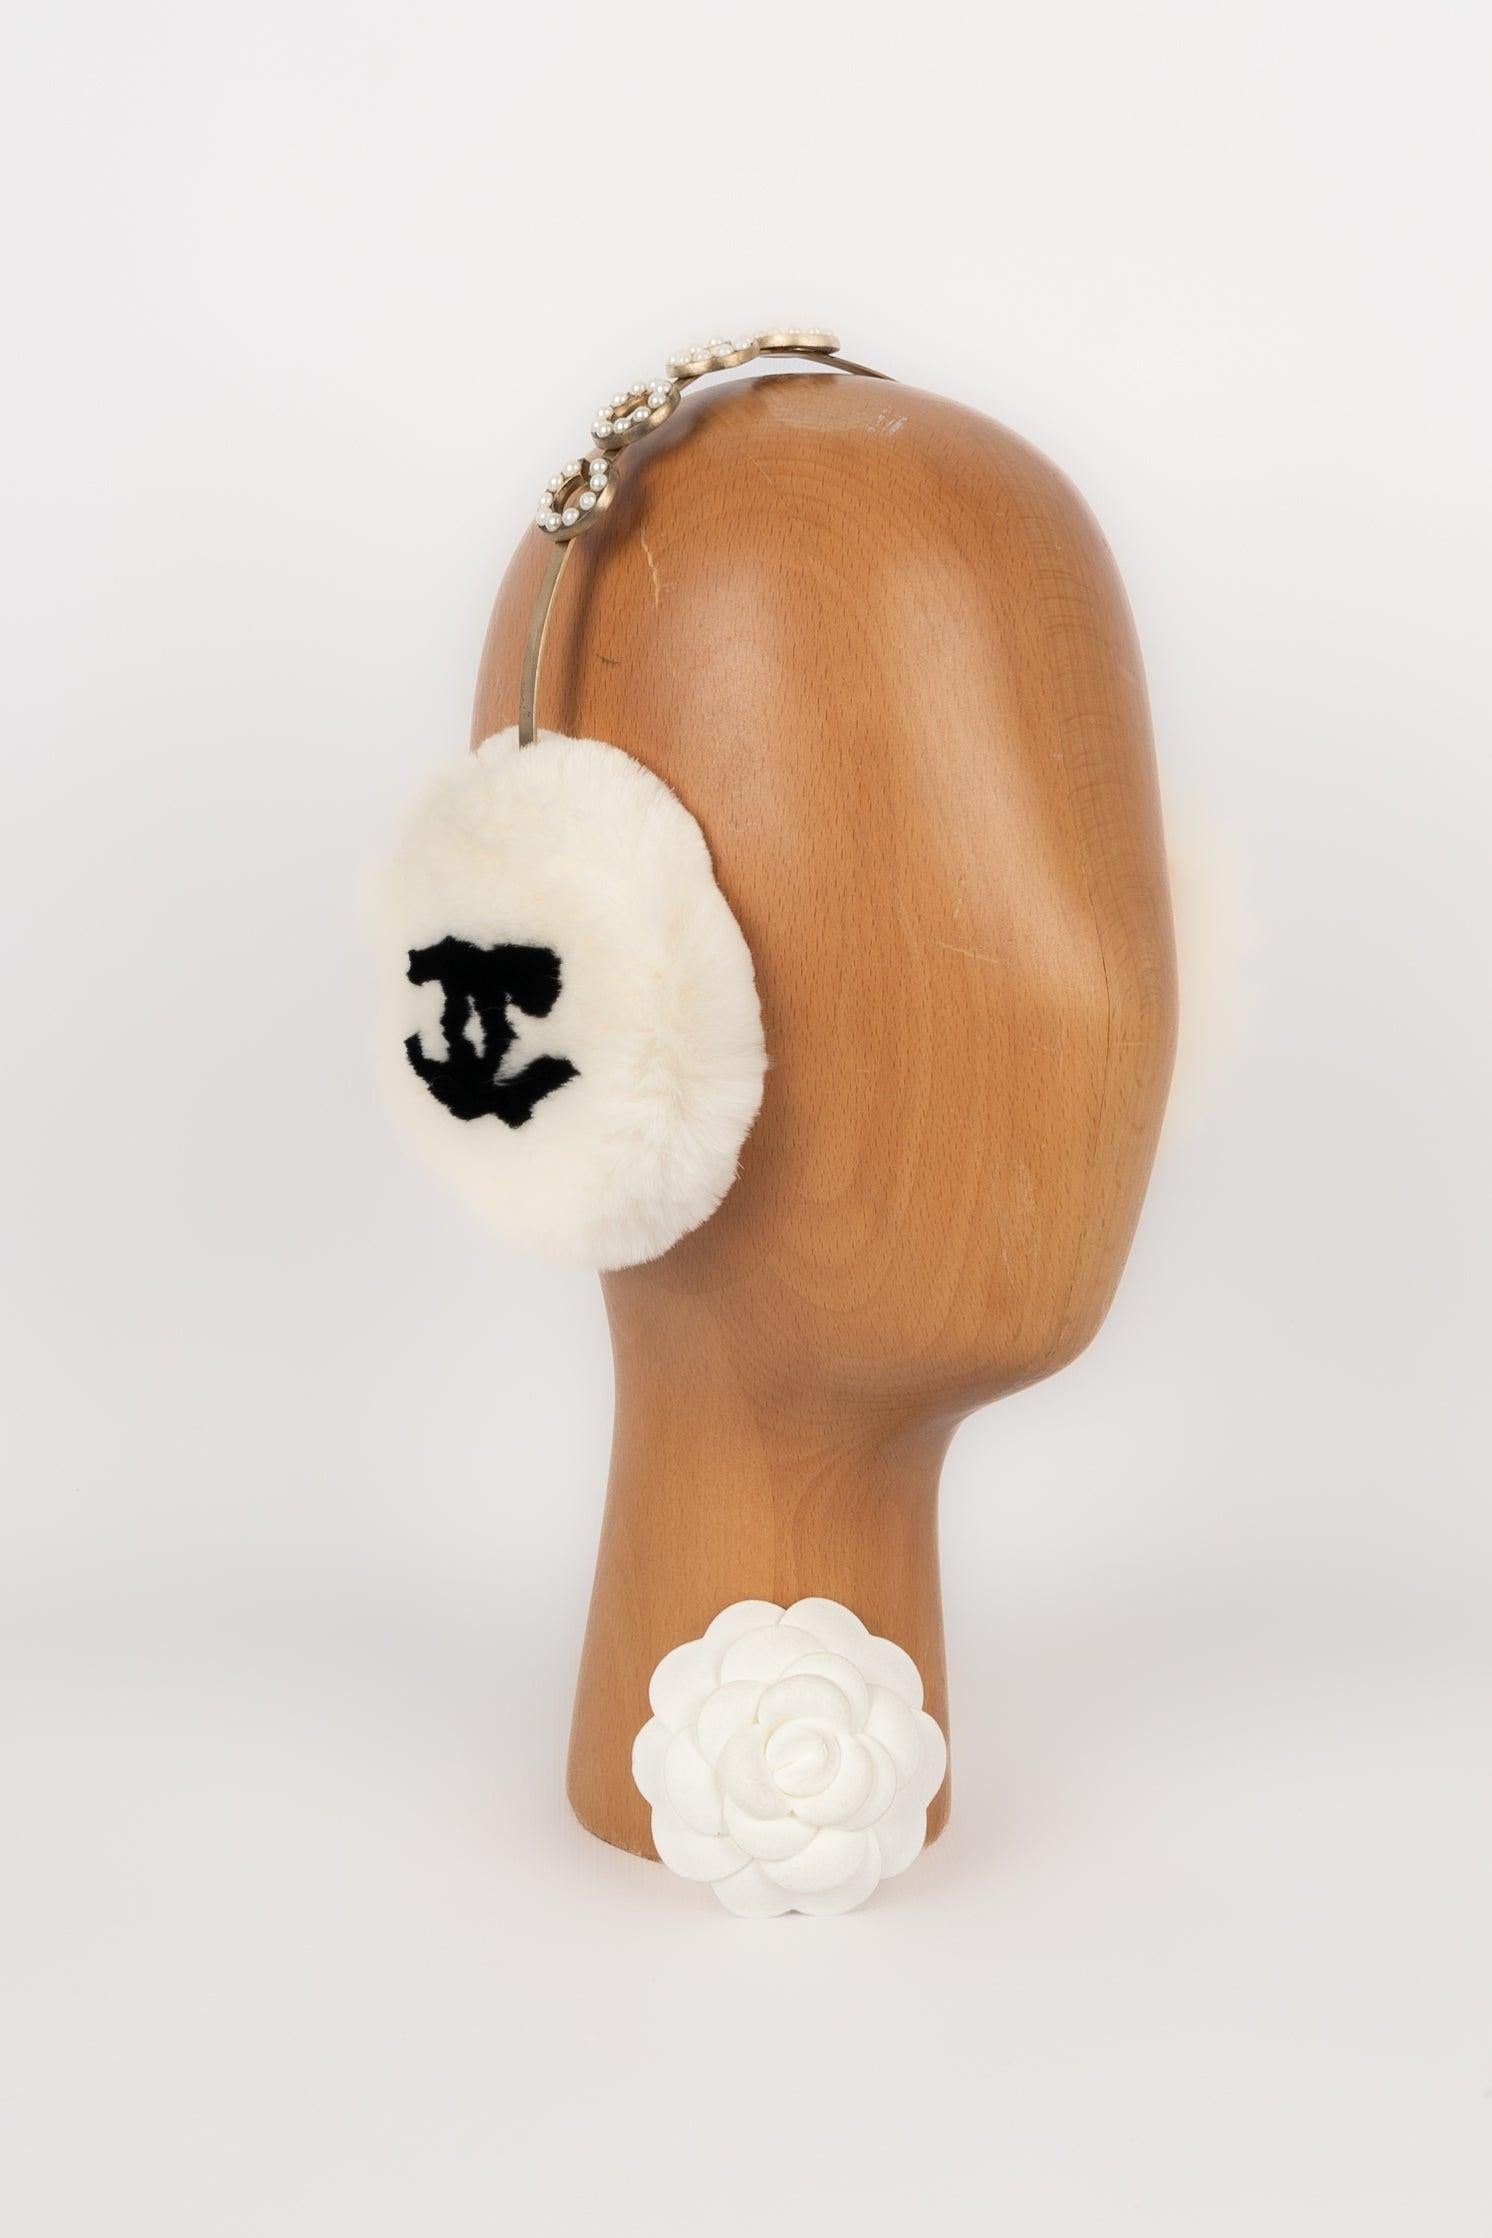 Chanel - (Made in France) Fur earmuffs with a golden metal ring and costume pearls. 2001 Fall-Winter Collection. To be mentioned, oxidization on the metal.
 
 Additional information: 
 Condition: Good condition
 Dimensions: Length: 48 cm
 Period: